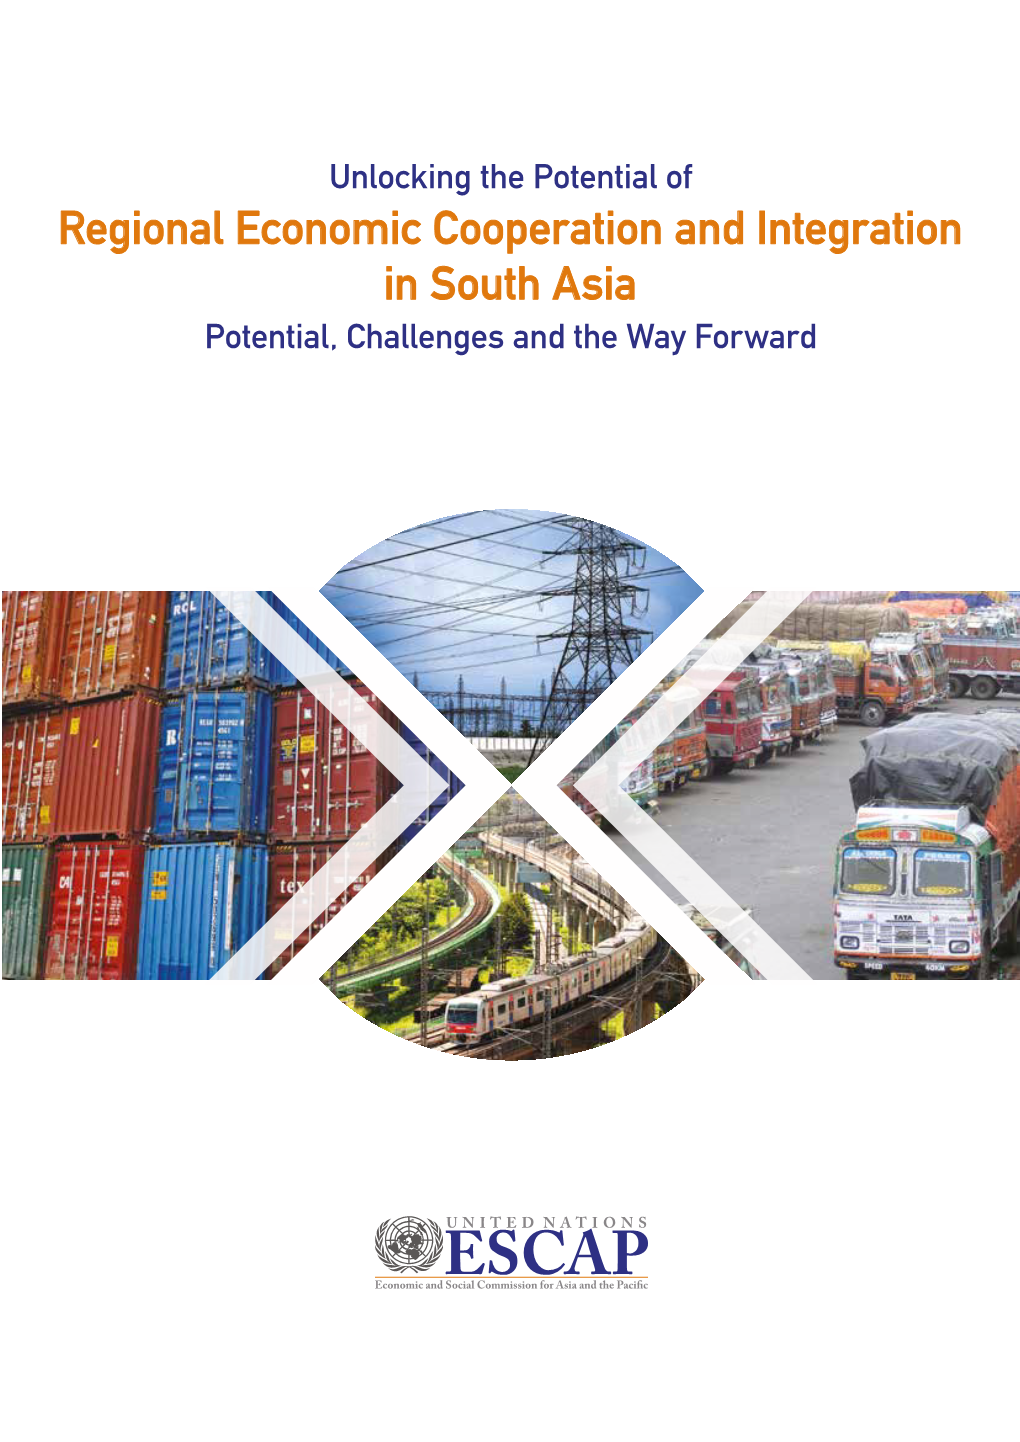 Regional Economic Cooperation and Integration in South Asia